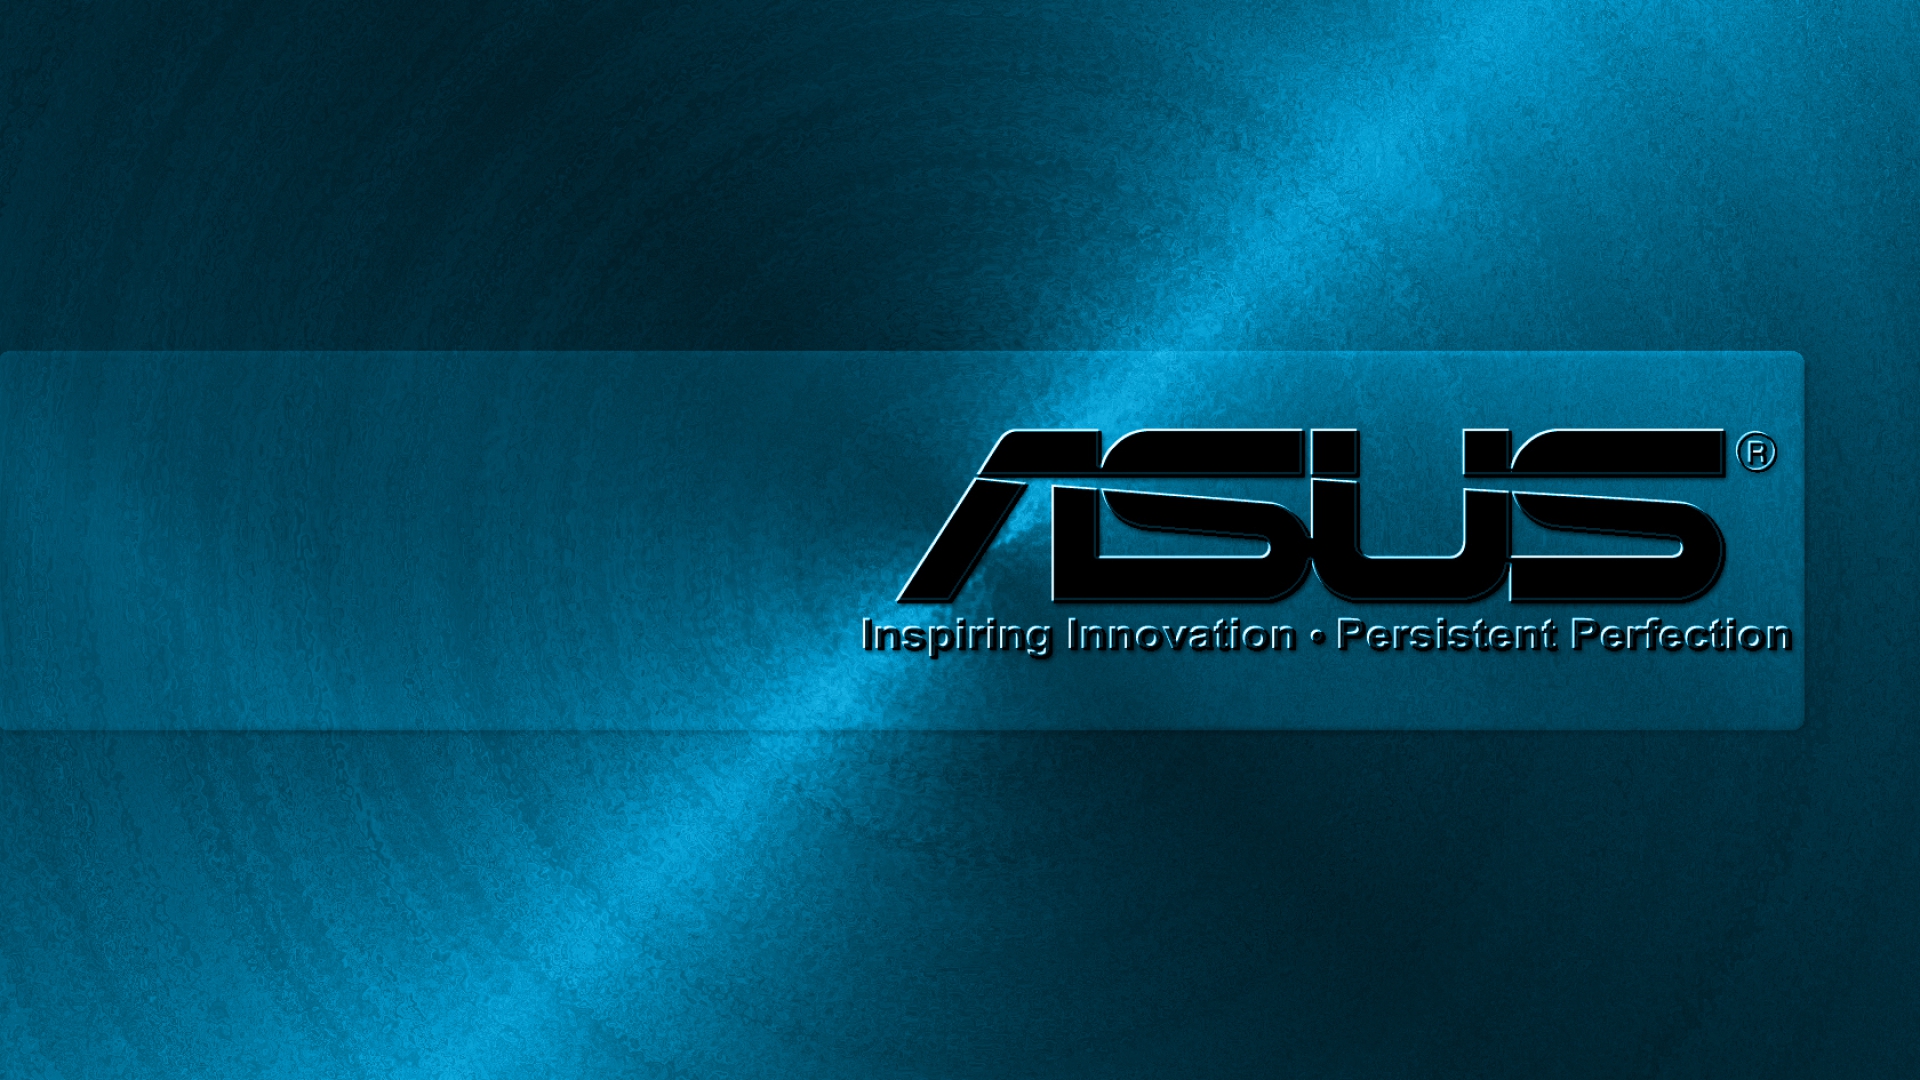 HD Wallpaper For Asus Laptop ImgHD Browse And